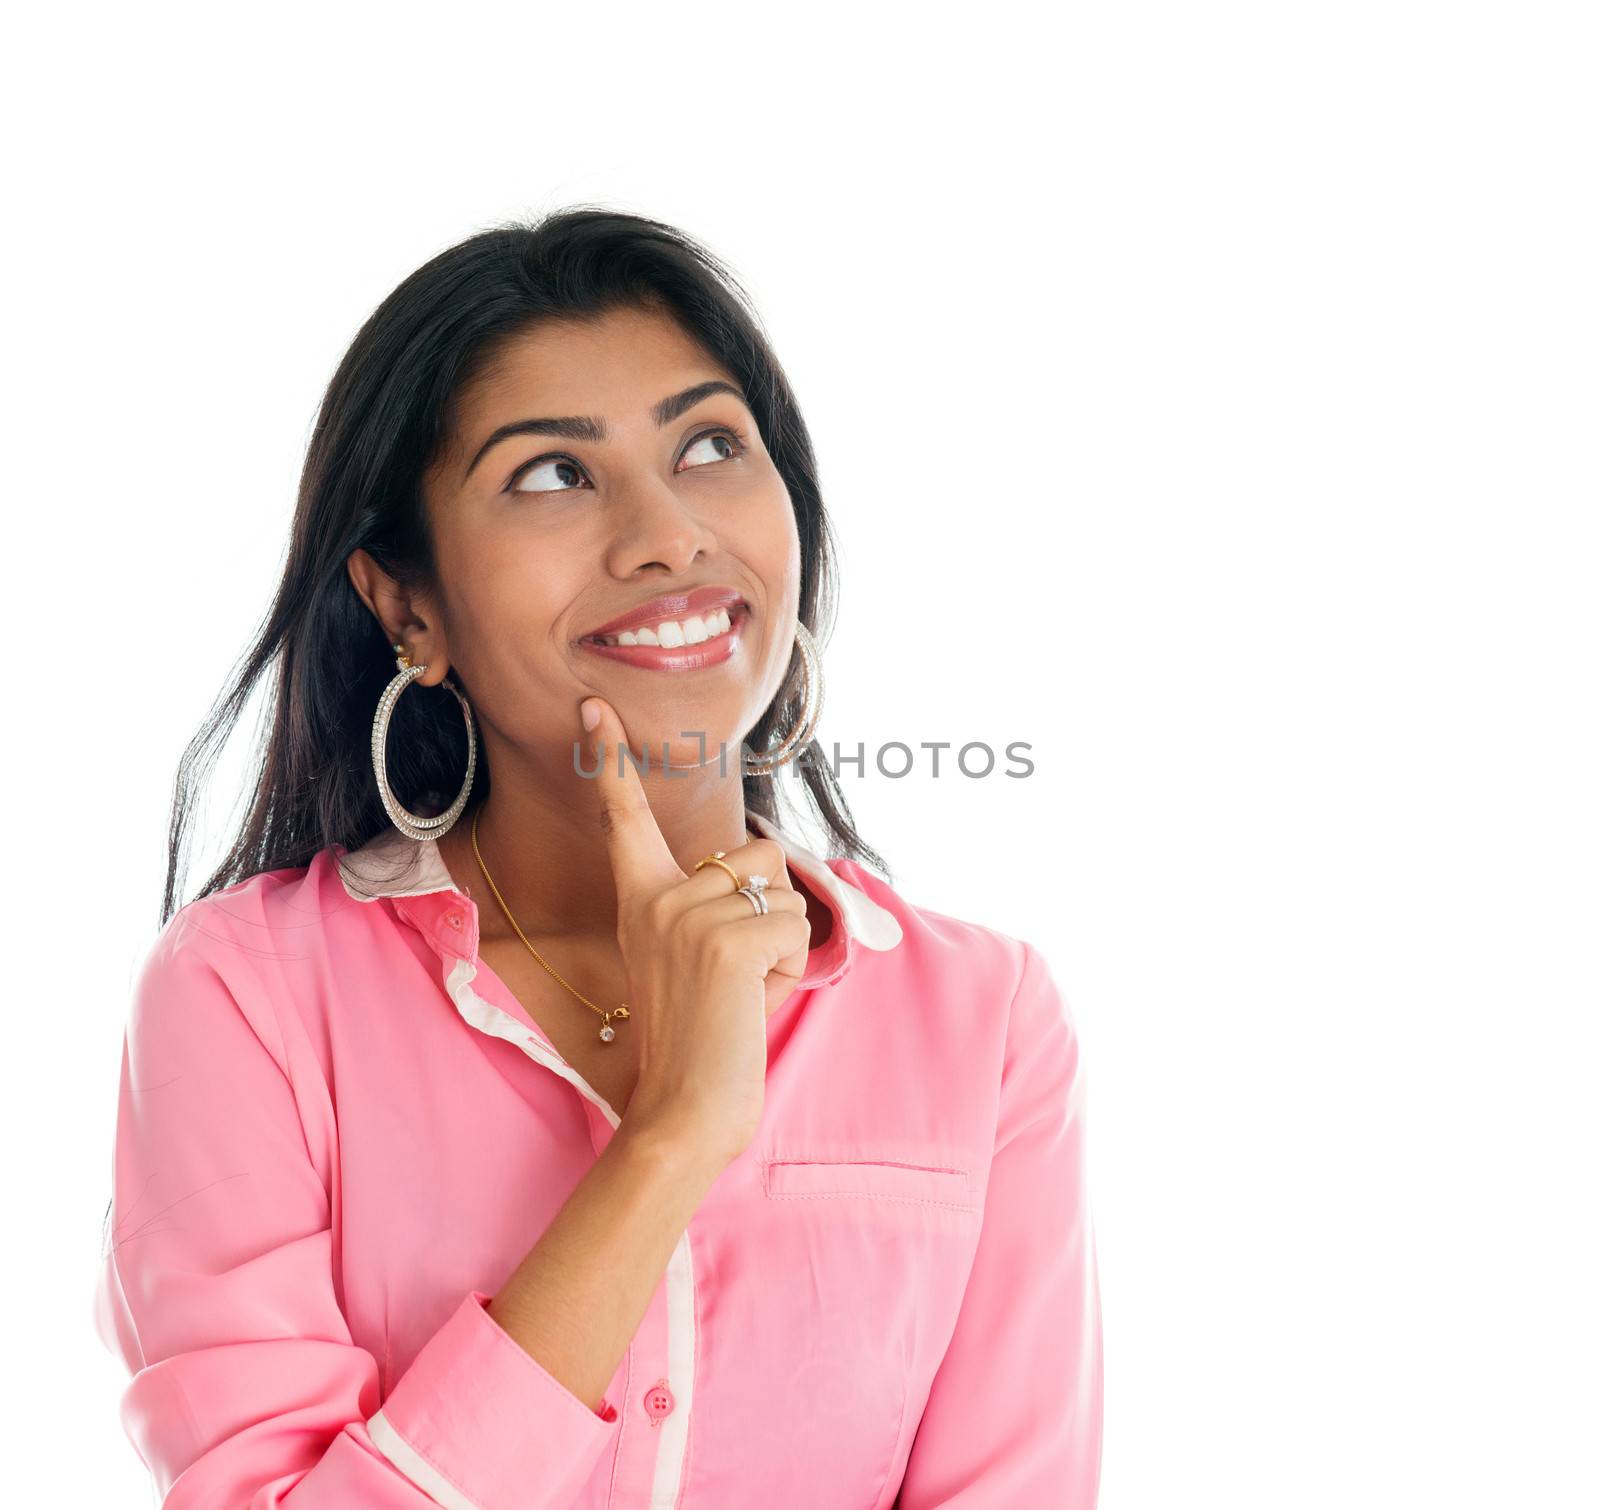 Indian woman thinking. India businesswoman having a thought, finger on chin looking up smiling happy. Portrait of beautiful Asian female model standing isolated on white background.